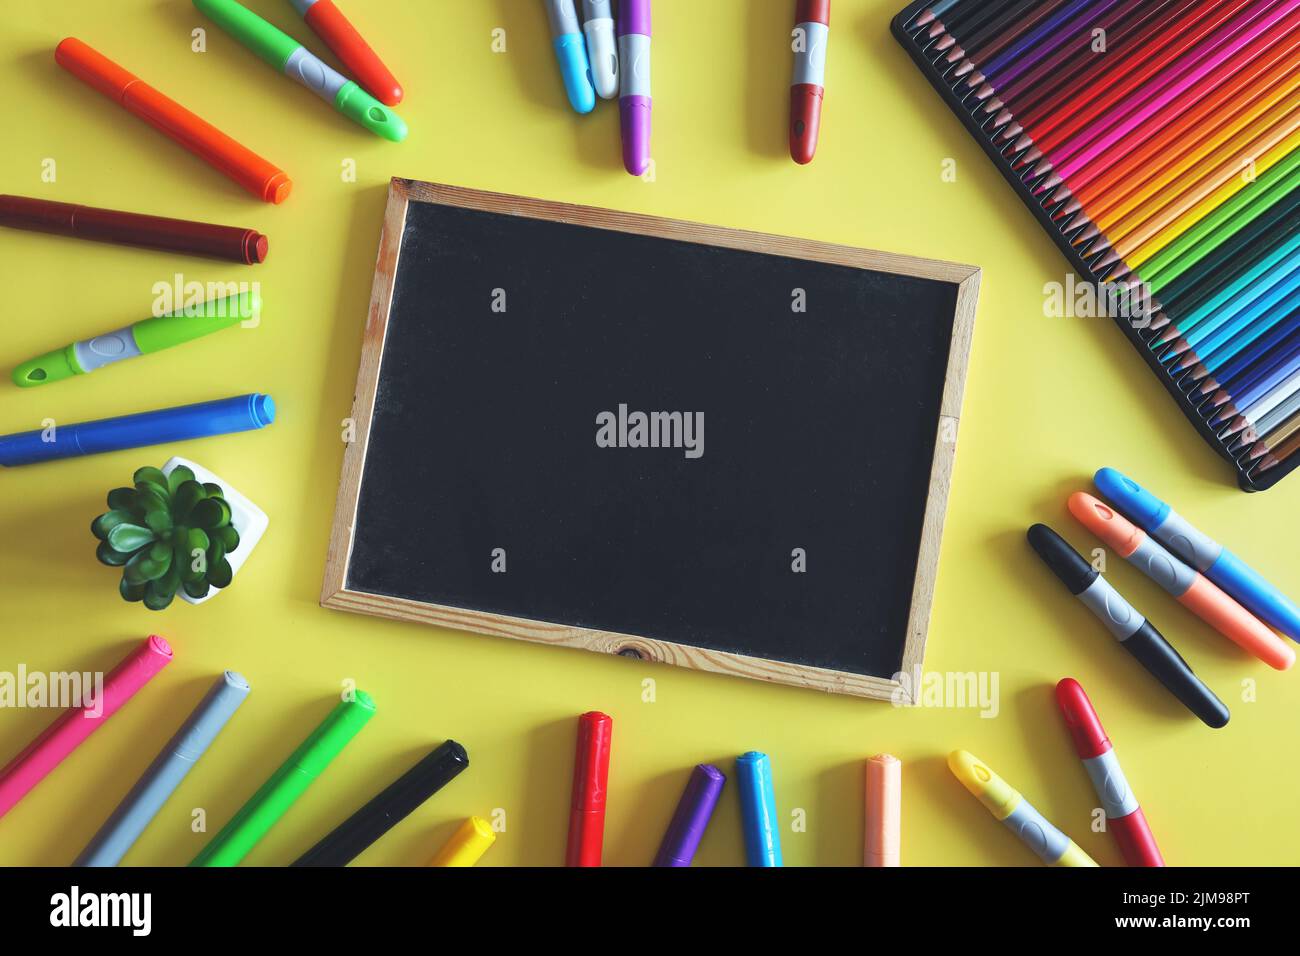 https://c8.alamy.com/comp/2JM98PT/chalk-board-with-colored-markers-and-pencils-on-yellow-background-school-supplies-for-kids-top-view-2JM98PT.jpg